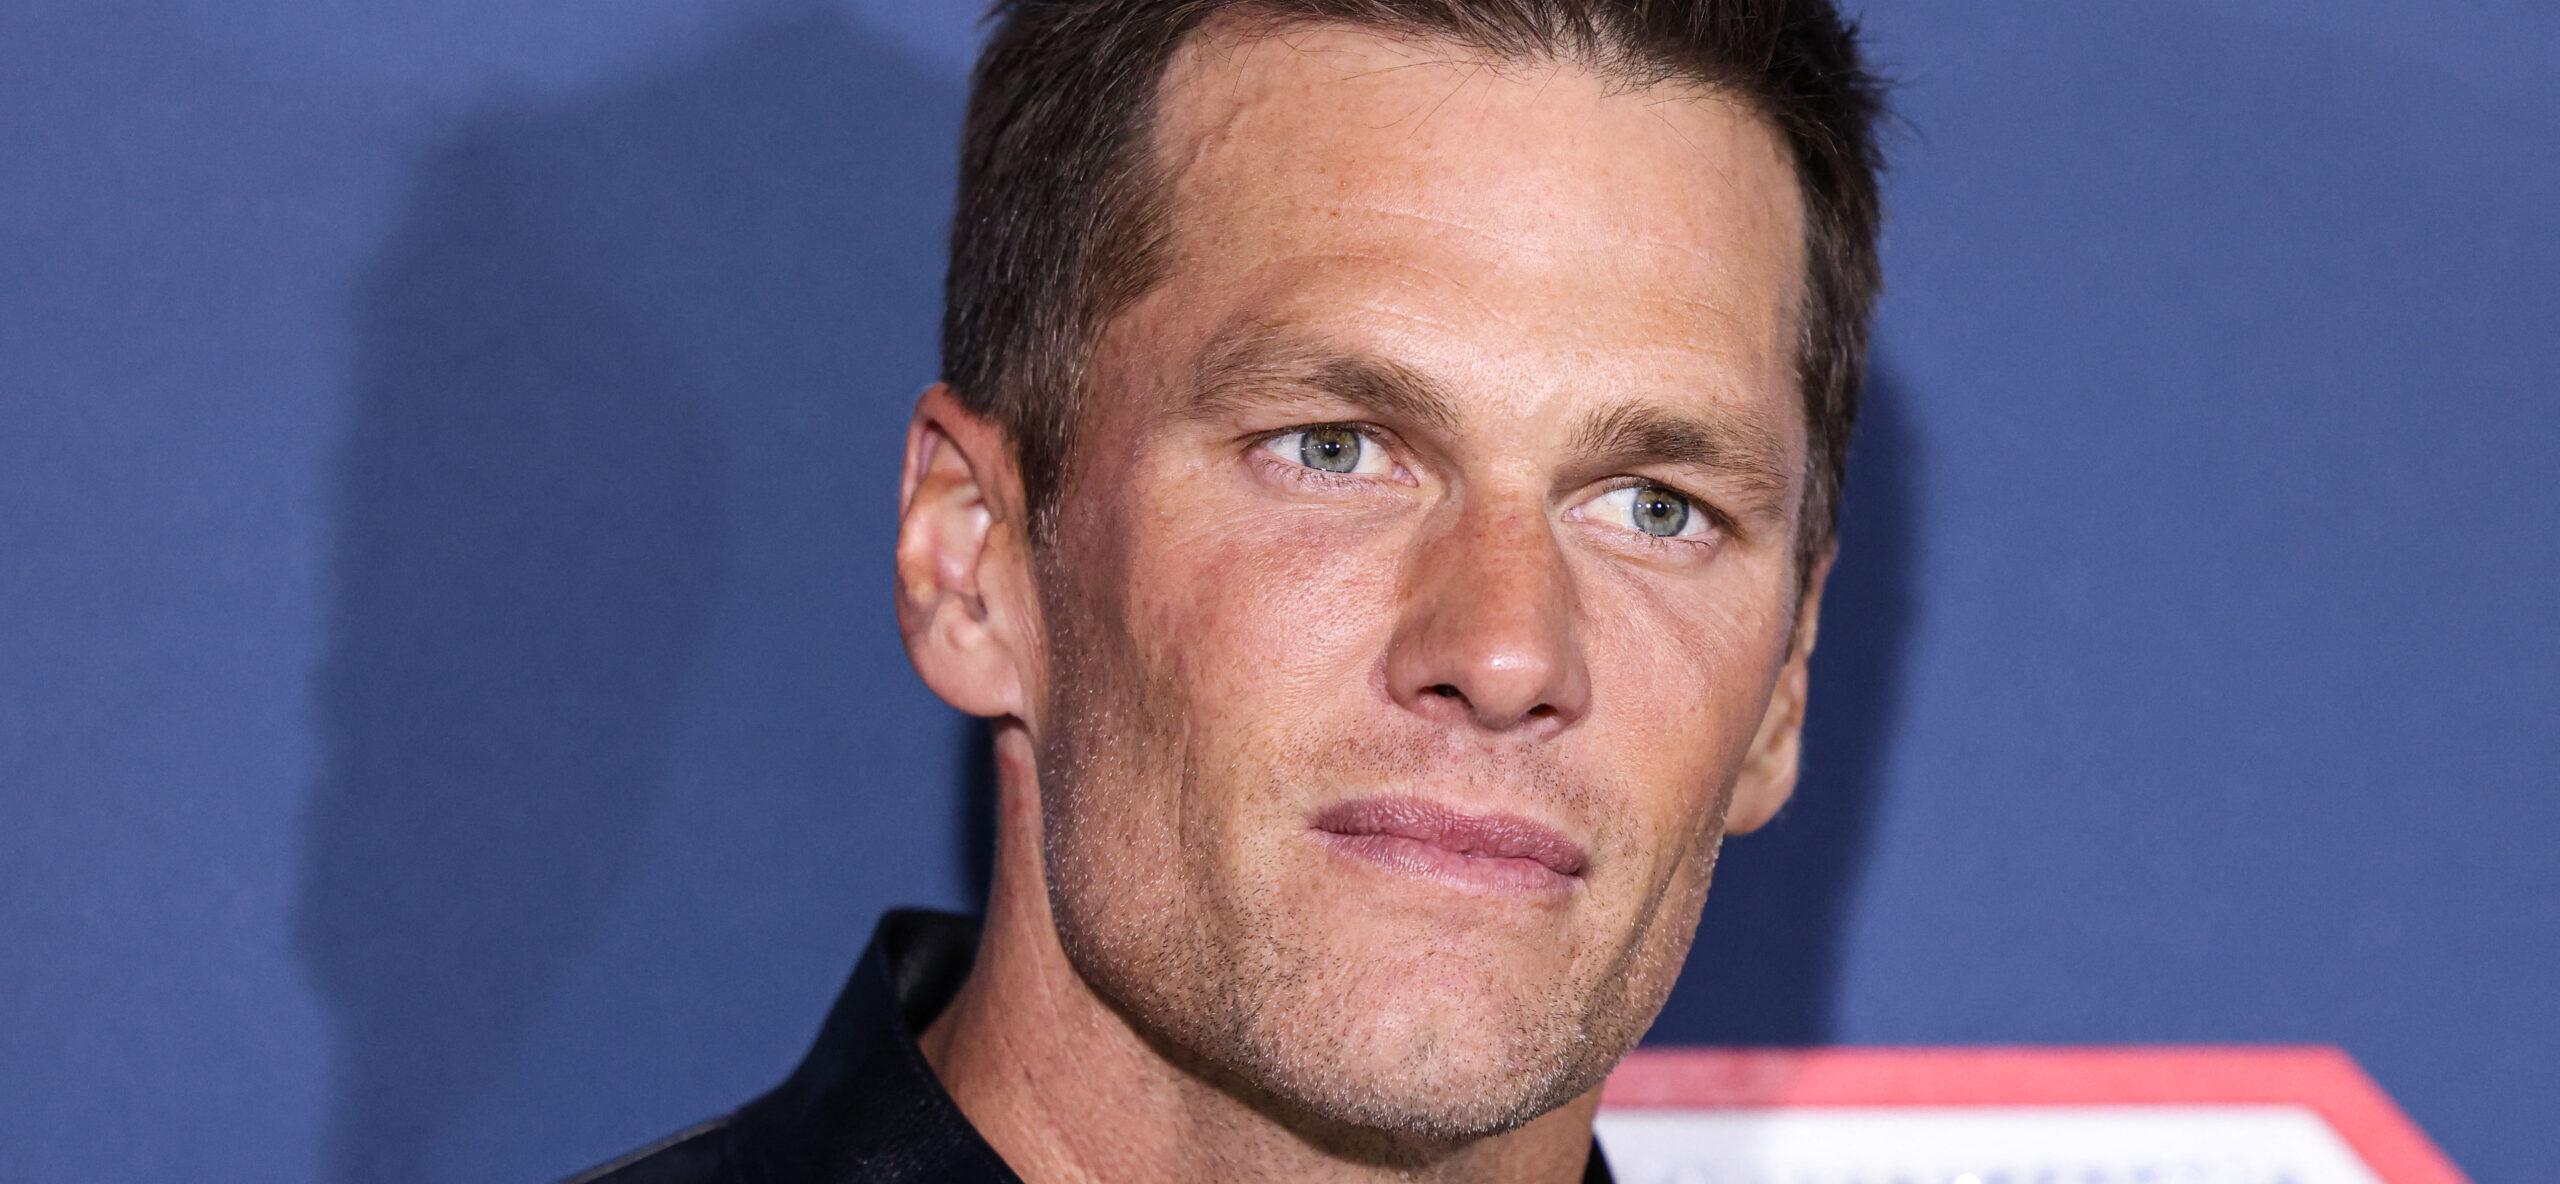 Former NFL Star Tom Brady Shares Thirst Trap: See The Steamy Photo!